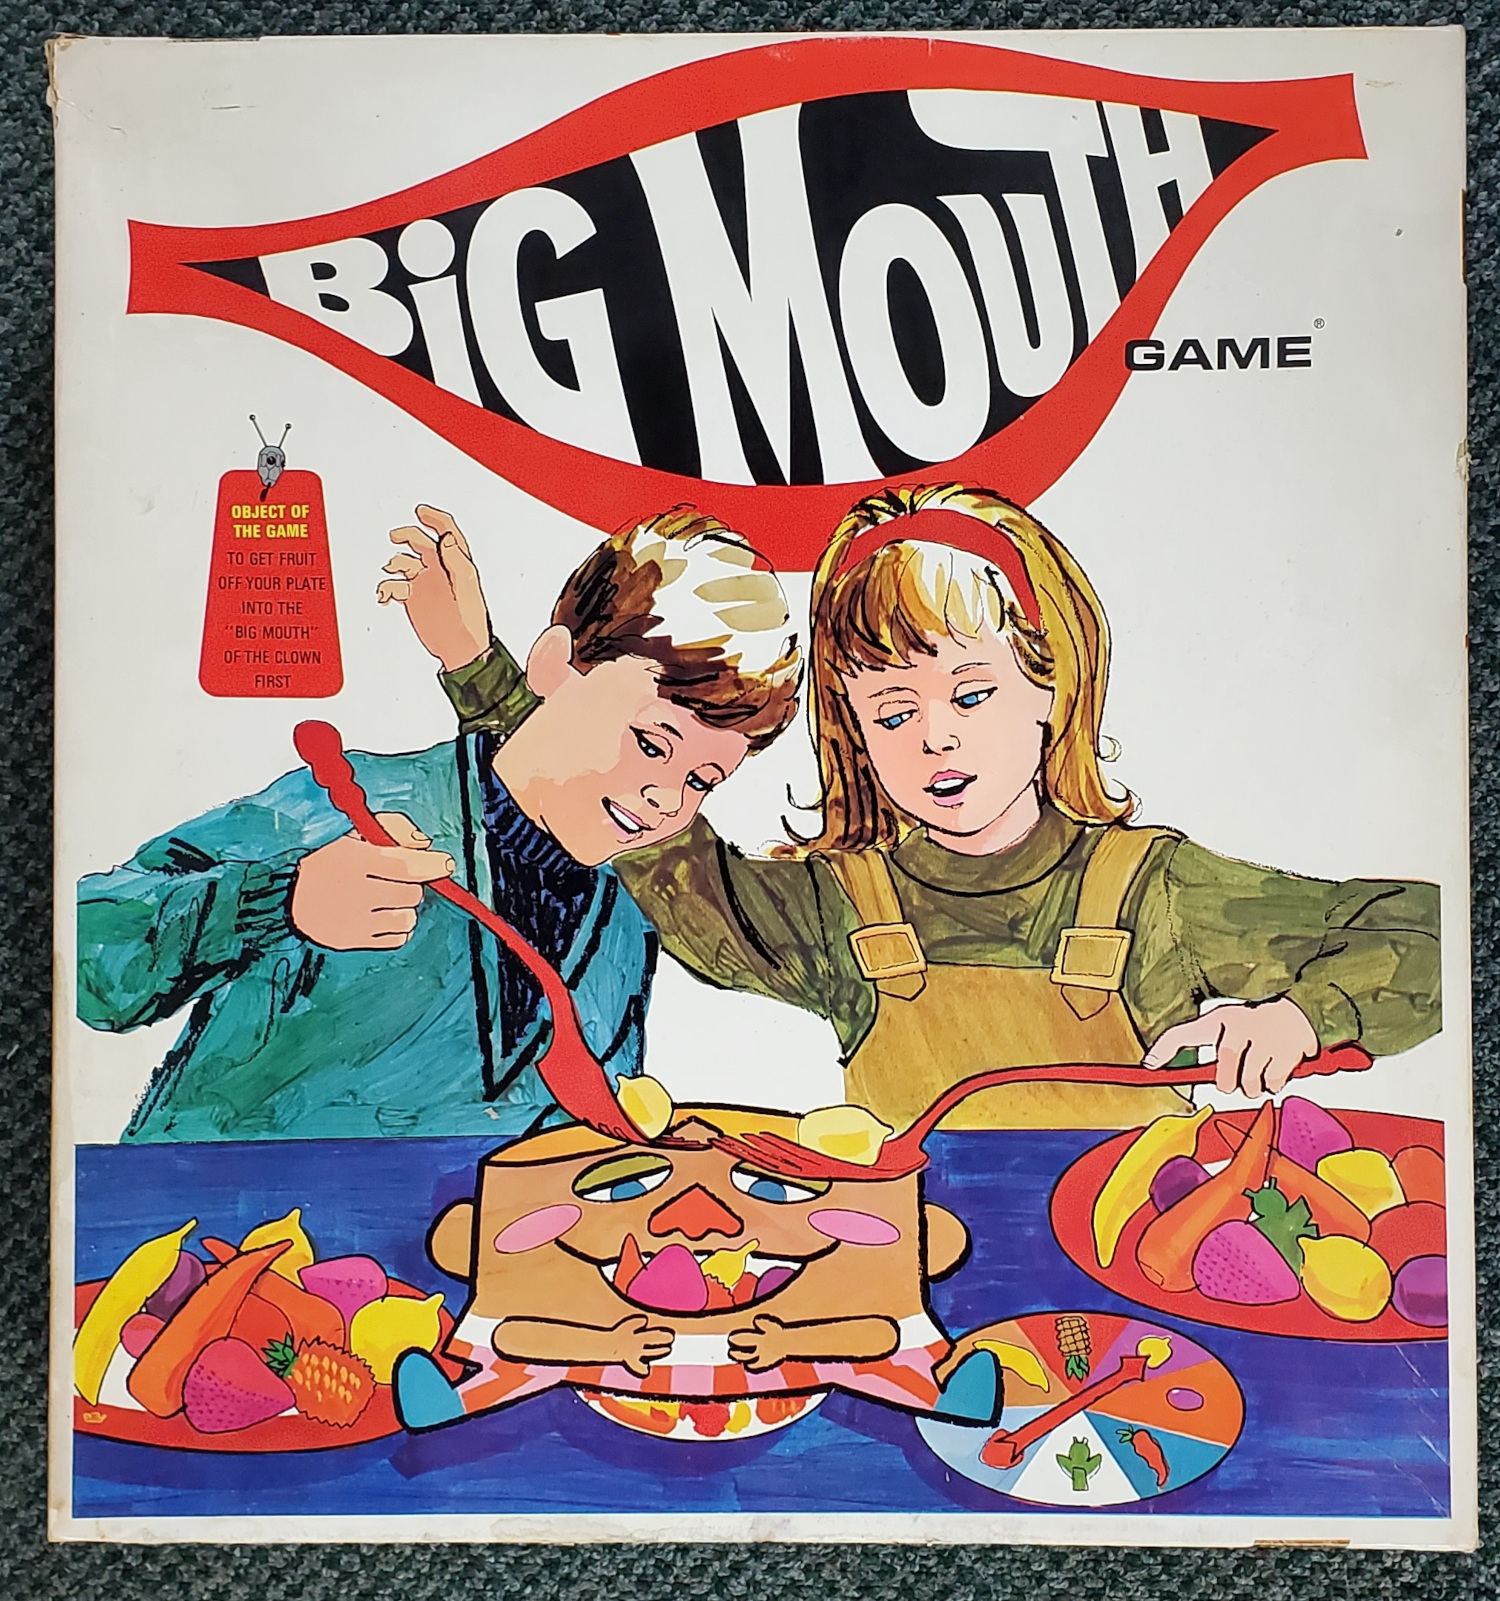 1968 Big Mouth Game by Schaper 1